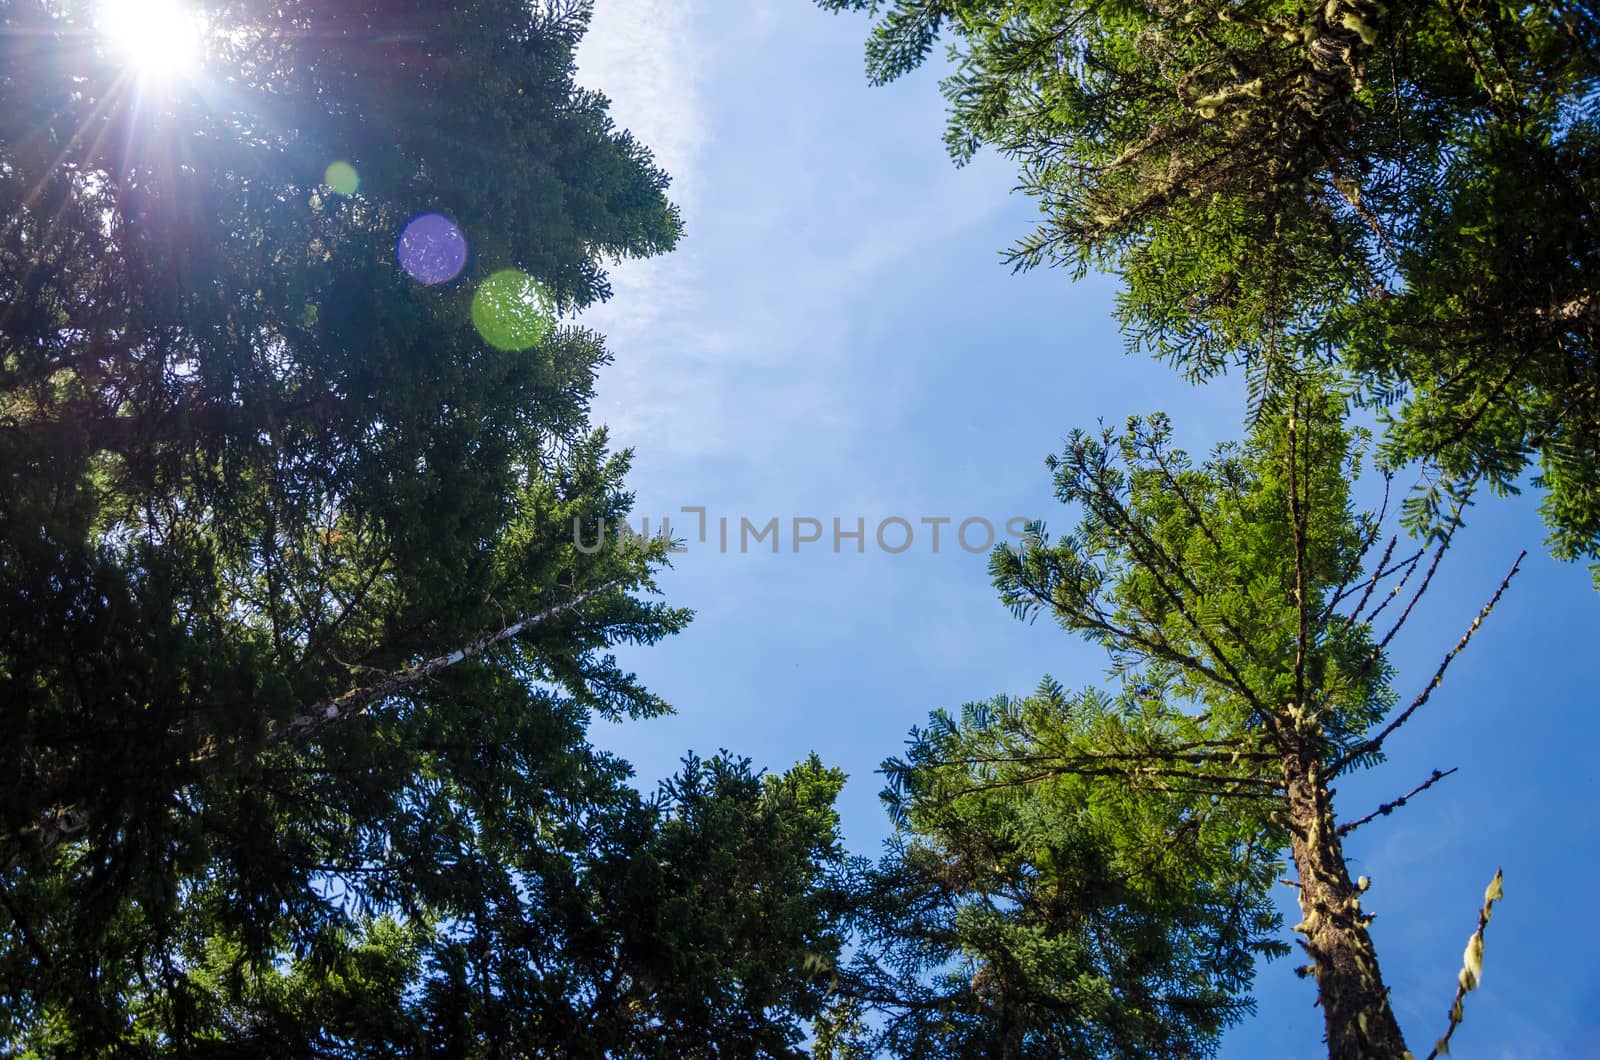 Looking up at pine trees with the sun and some lens flare visible